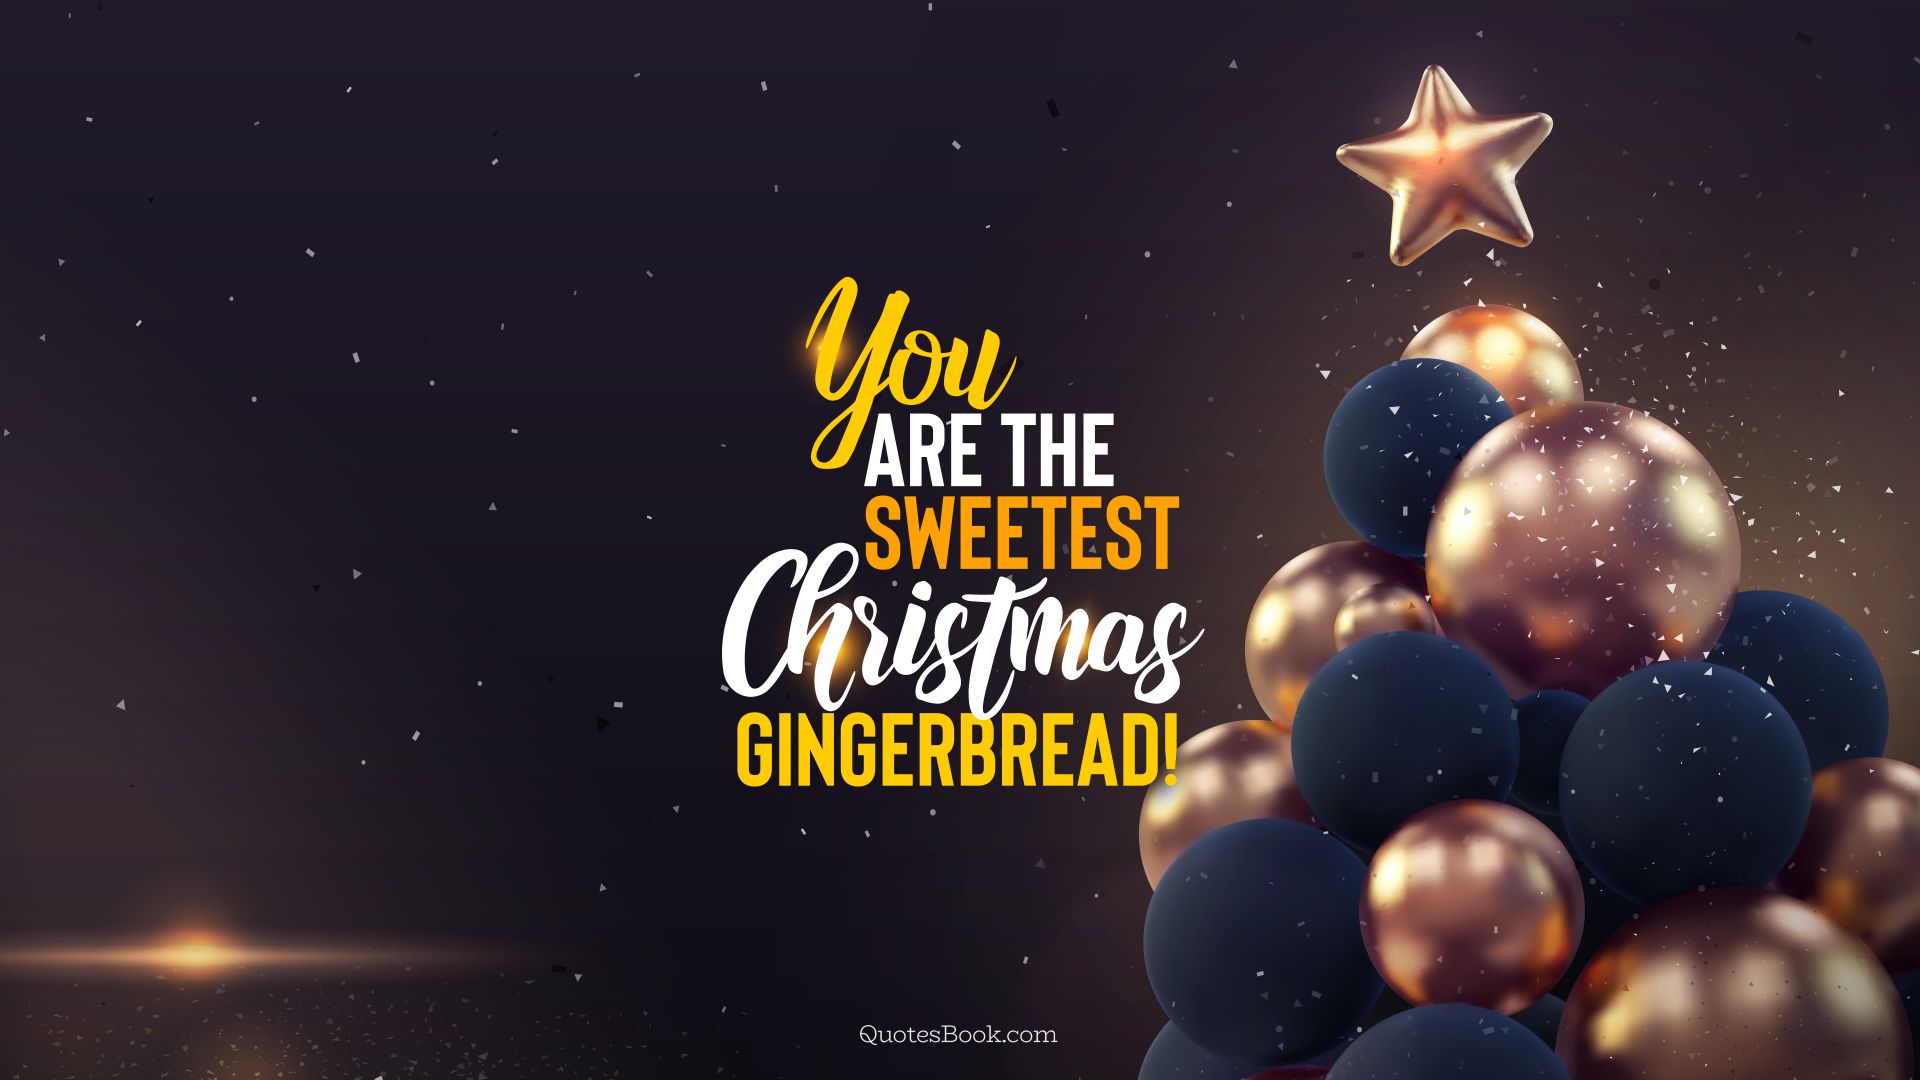 You are the sweetest Christmas gingerbread!. - Quote by QuotesBook